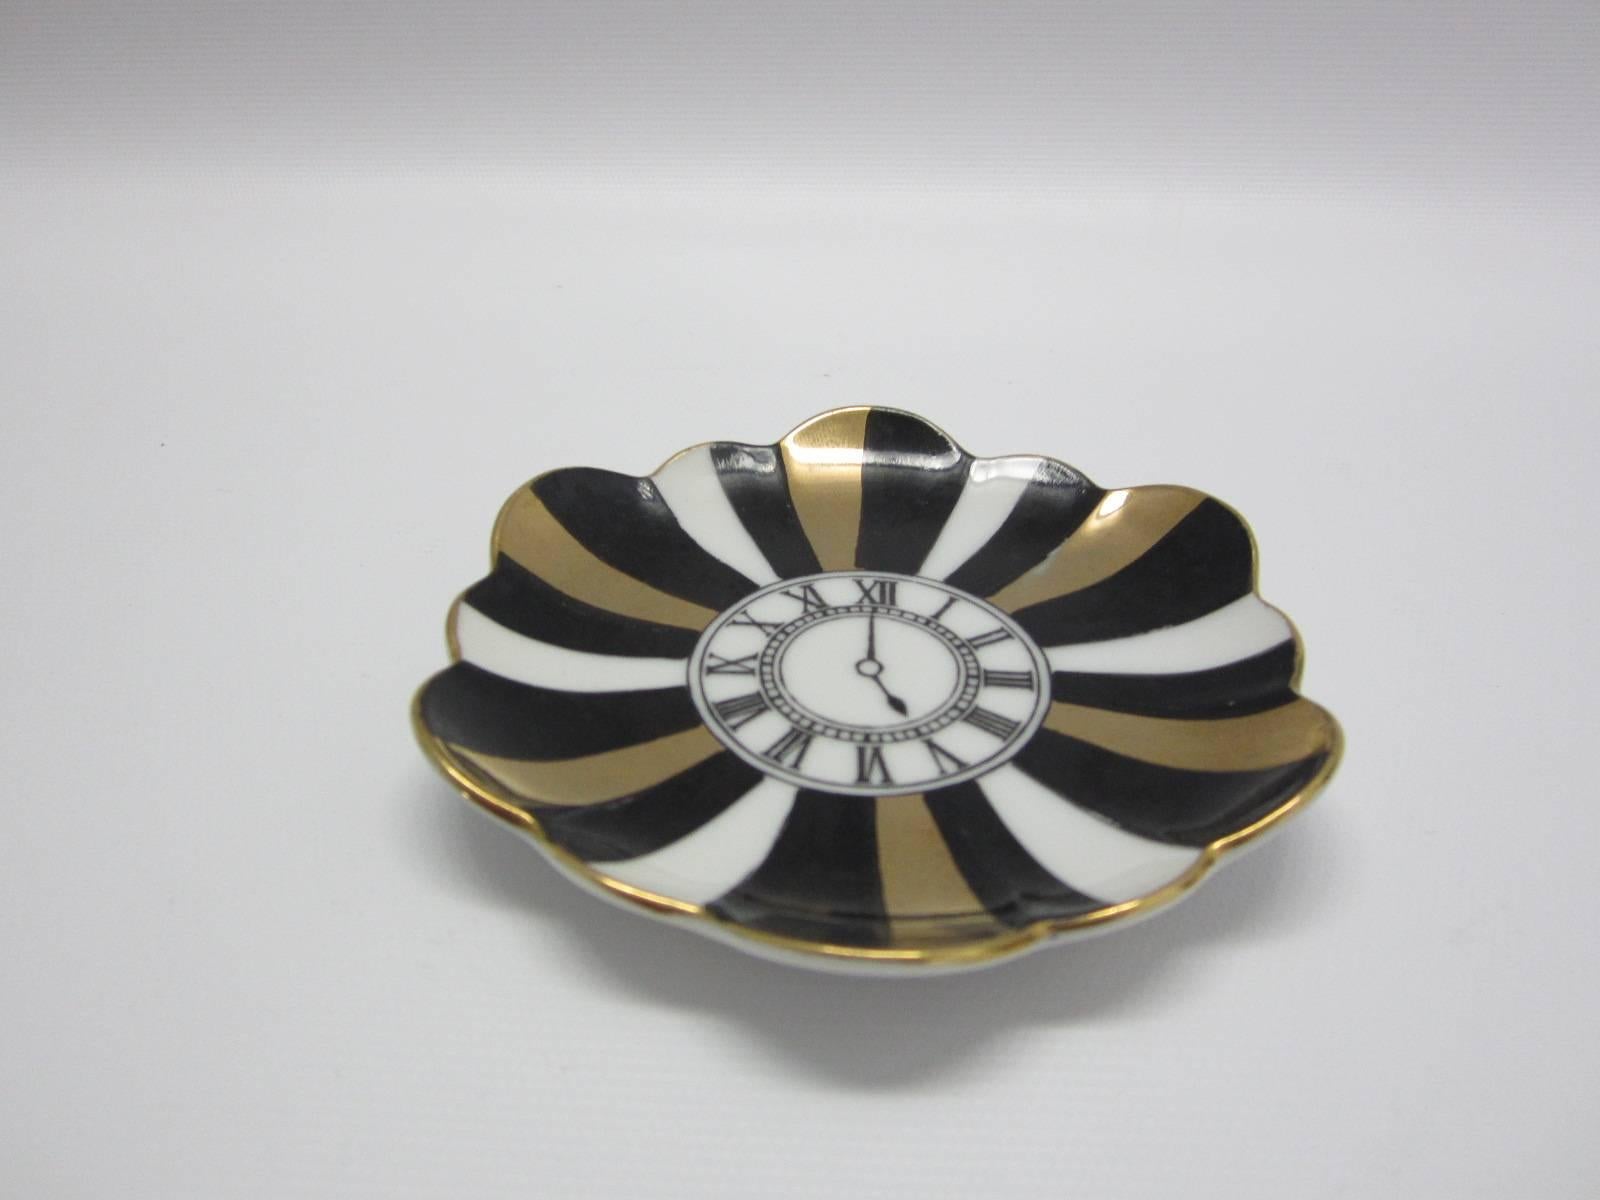 Porcelain trinket dish made expressly for Bergdorf Goodman New York City. Roman numeral clock design surrounded by black, gold and white stripes and scalloped edges.